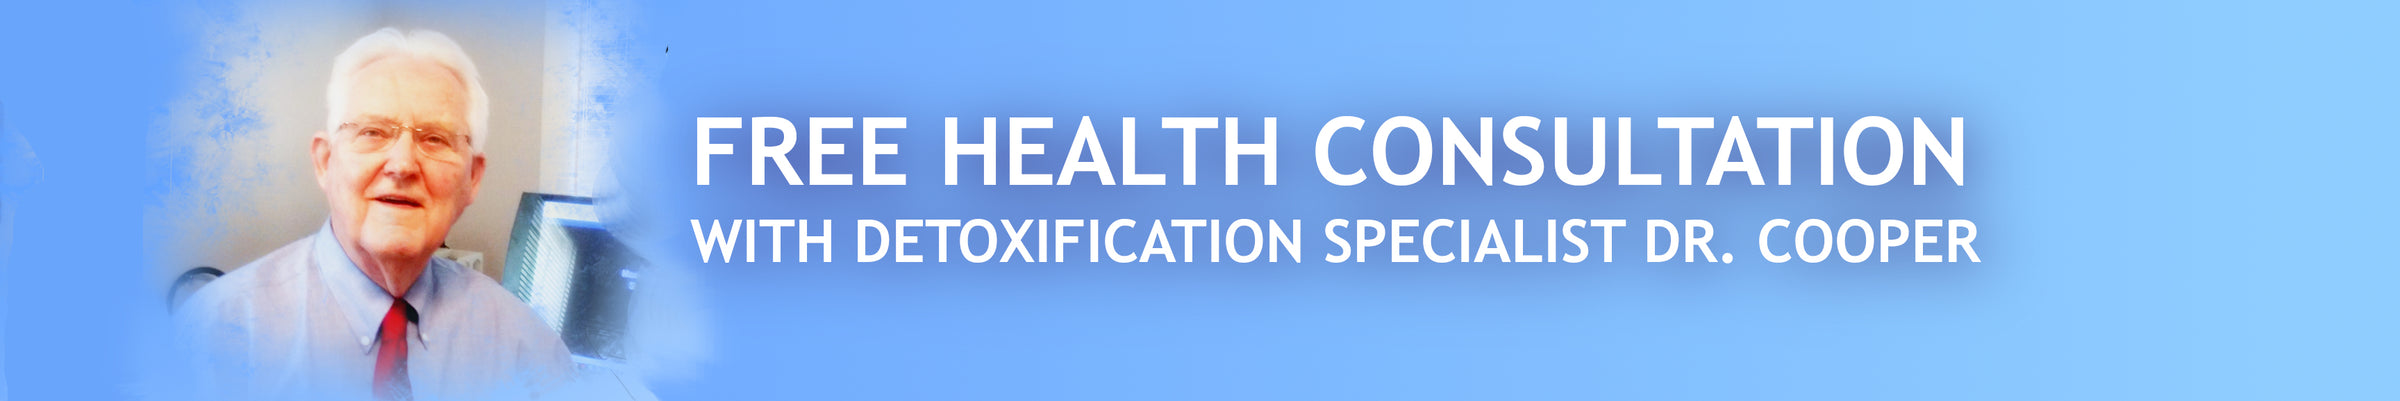 Free Health Consultation with detoxification Specialist Doc Cooper